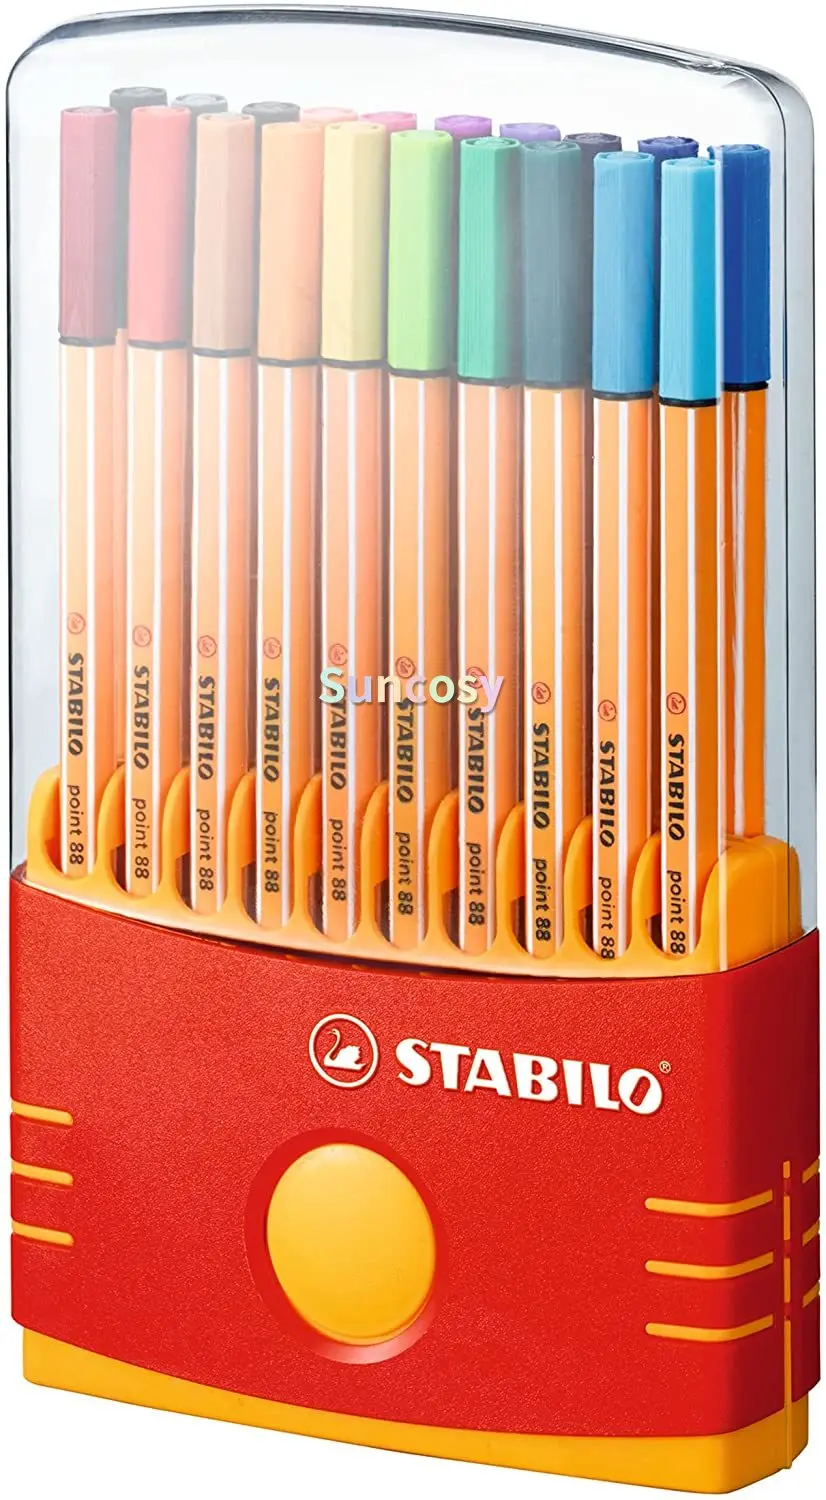 Stabilo Point 88 Fineliner Pens, 0.4 Mm 20 Color Case Create Intricate Details,Drawing Set for Artist Students|Crayons| - AliExpress